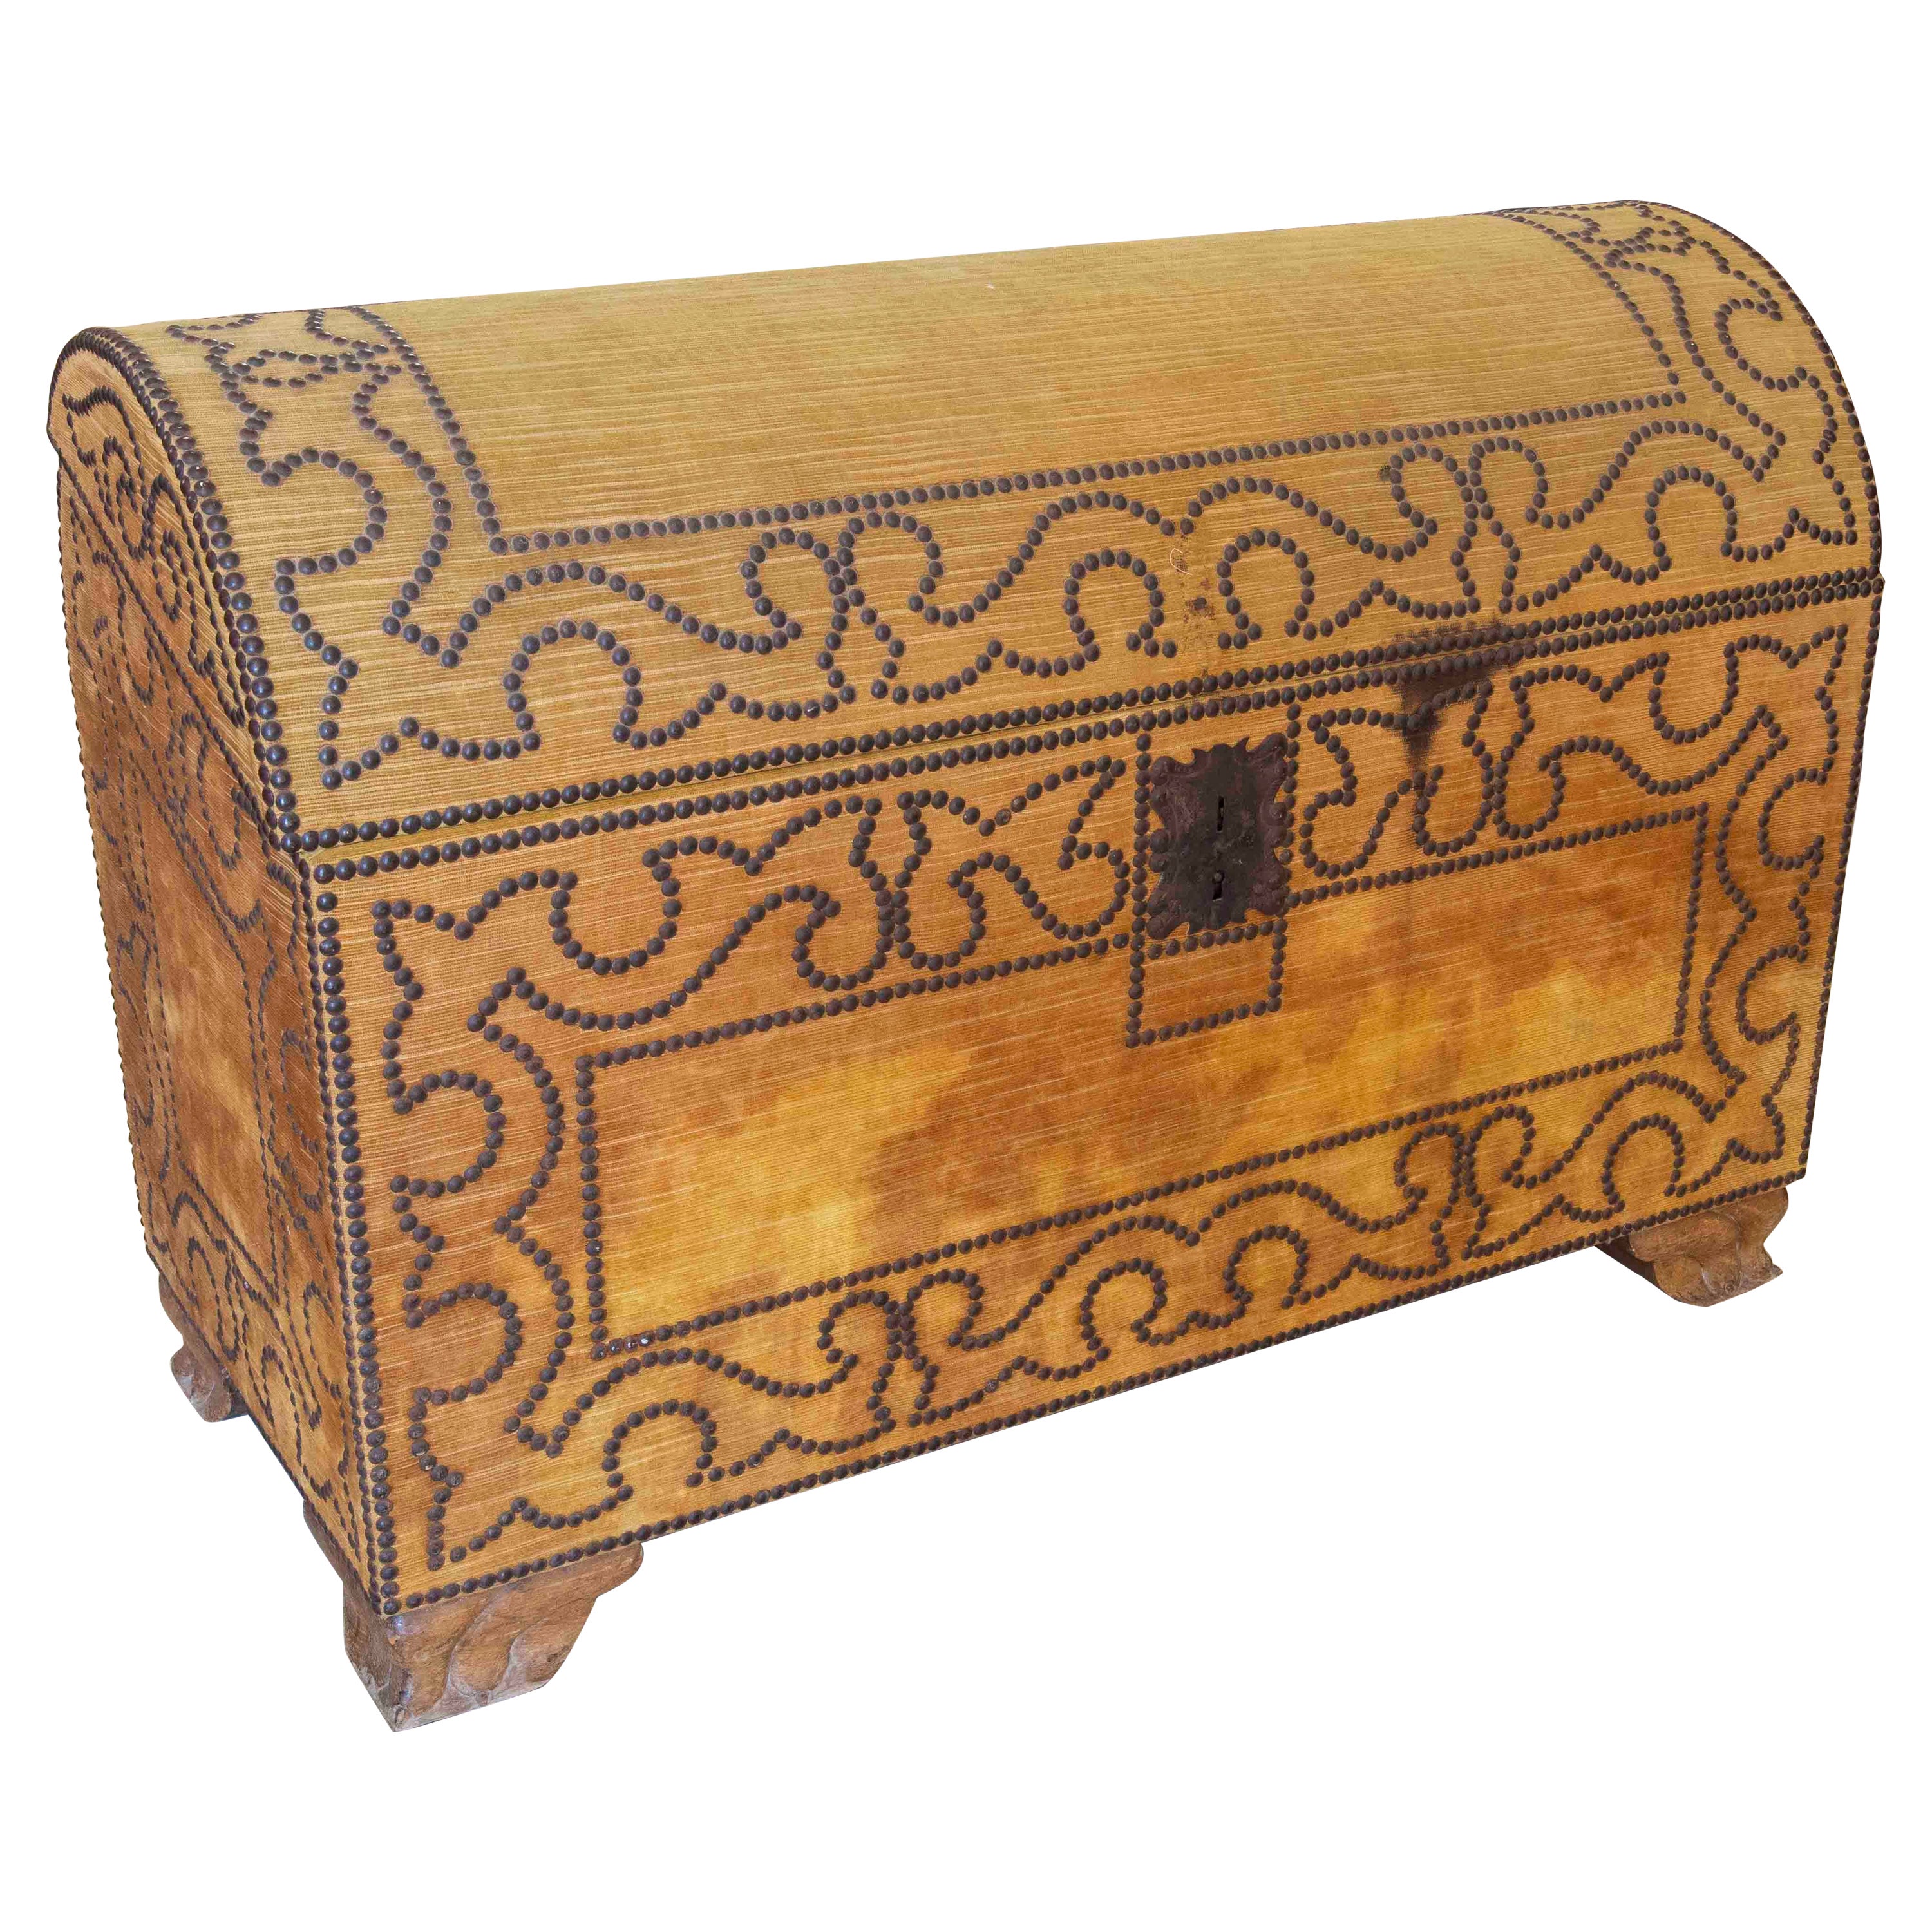 19th Century Spanish Wooden Trunk Lined with Yellow Velvet Fabric For Sale